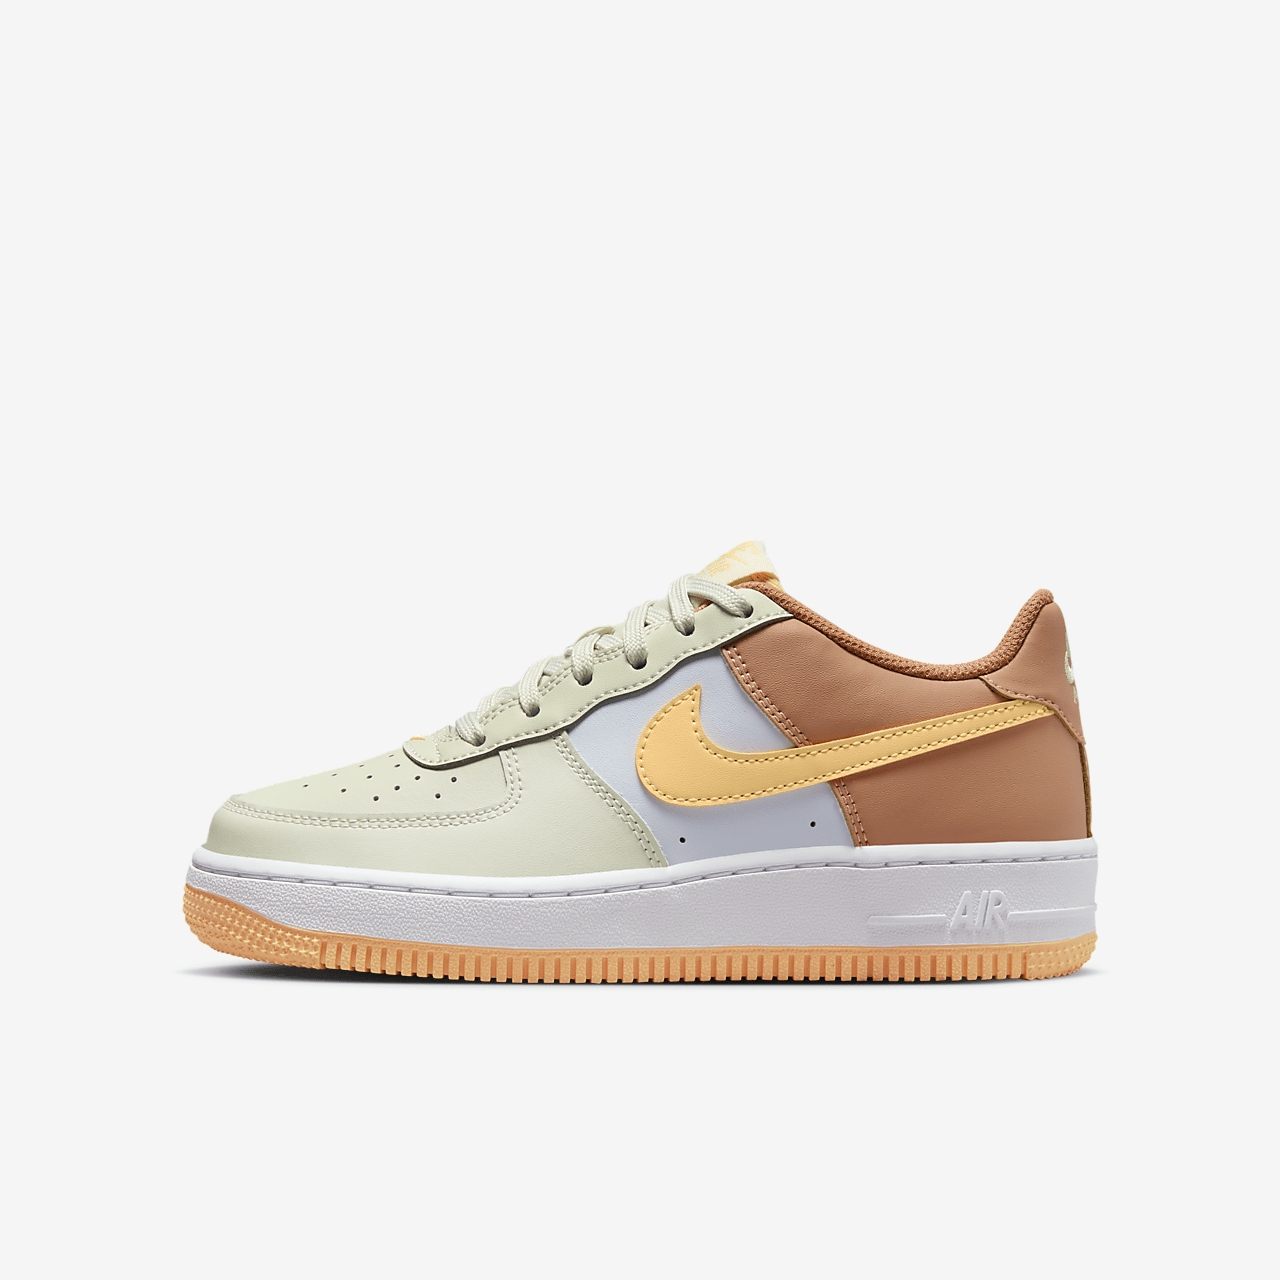 Nike Air Force 1 GS Sea Glass Amber Brown Melon Tint CT3839-006 | More ...